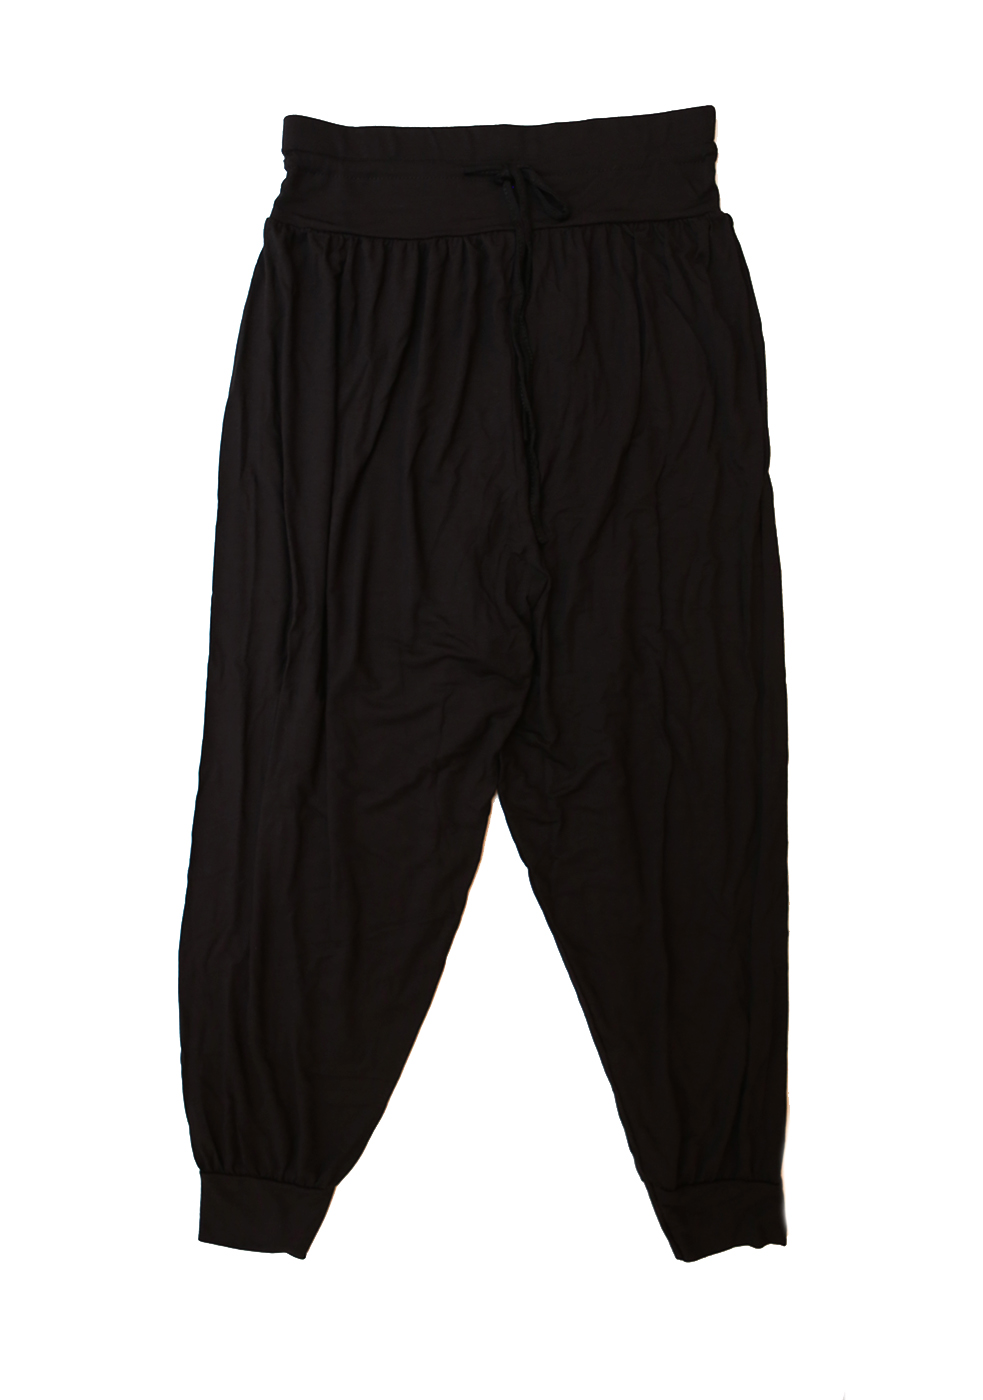 What should one know about black harem pants? - StyleSkier.com